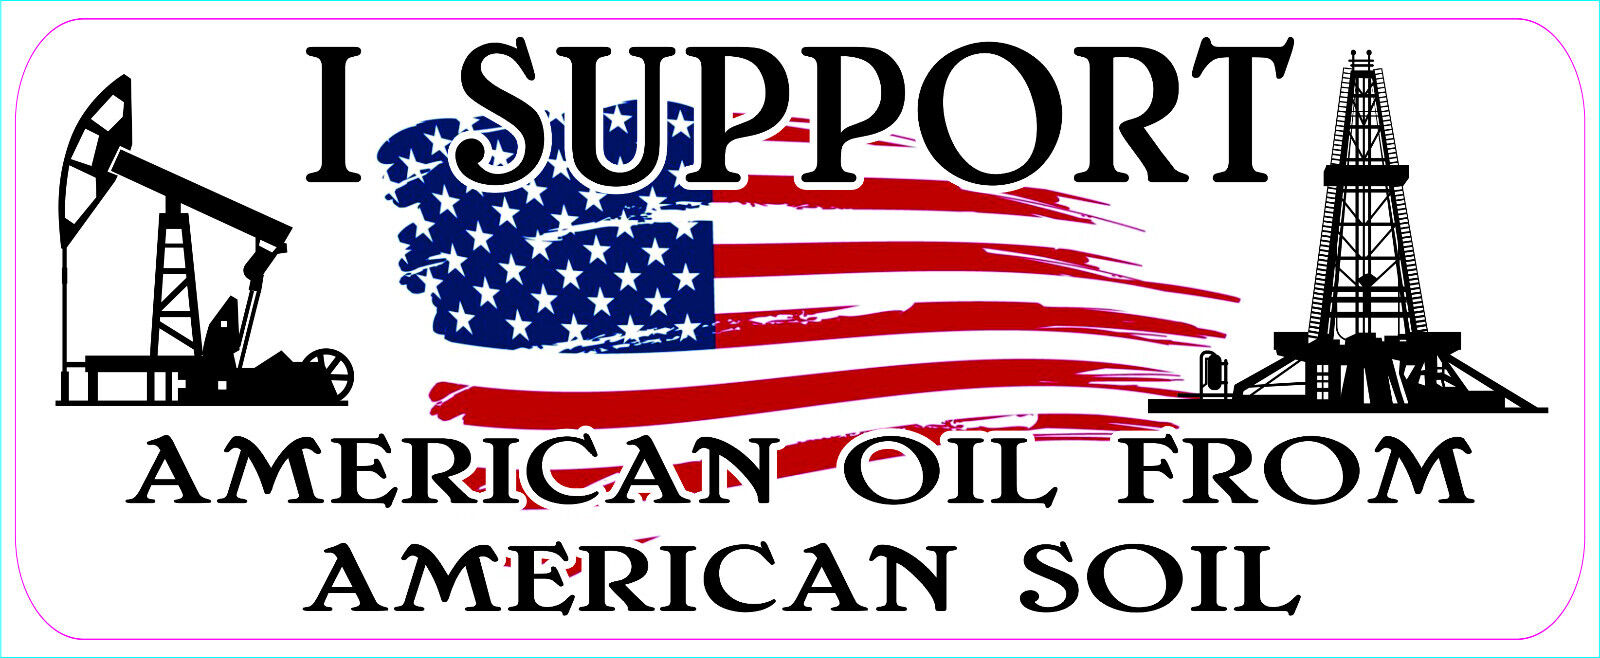 I Support Oil